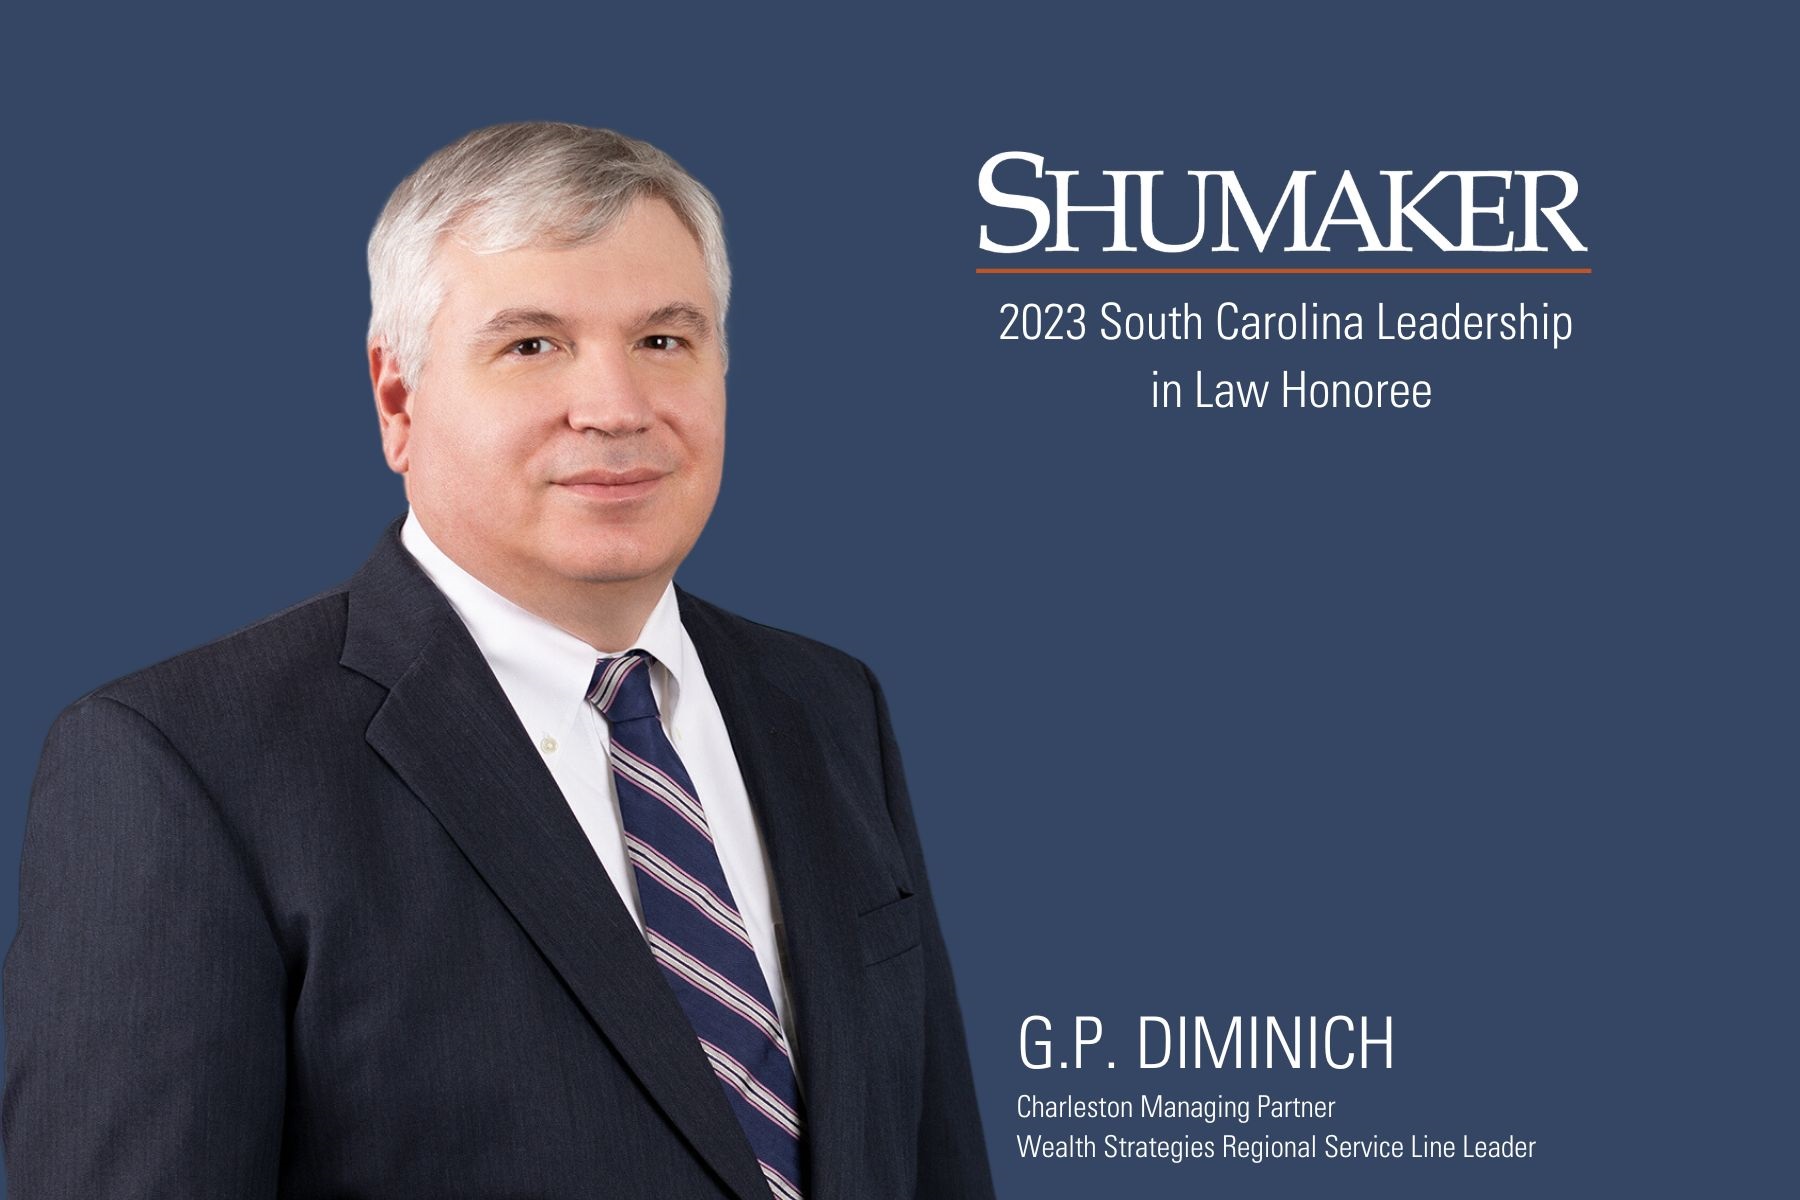 G.P. Diminich Named a 2023 South Carolina Leadership in Law Honoree